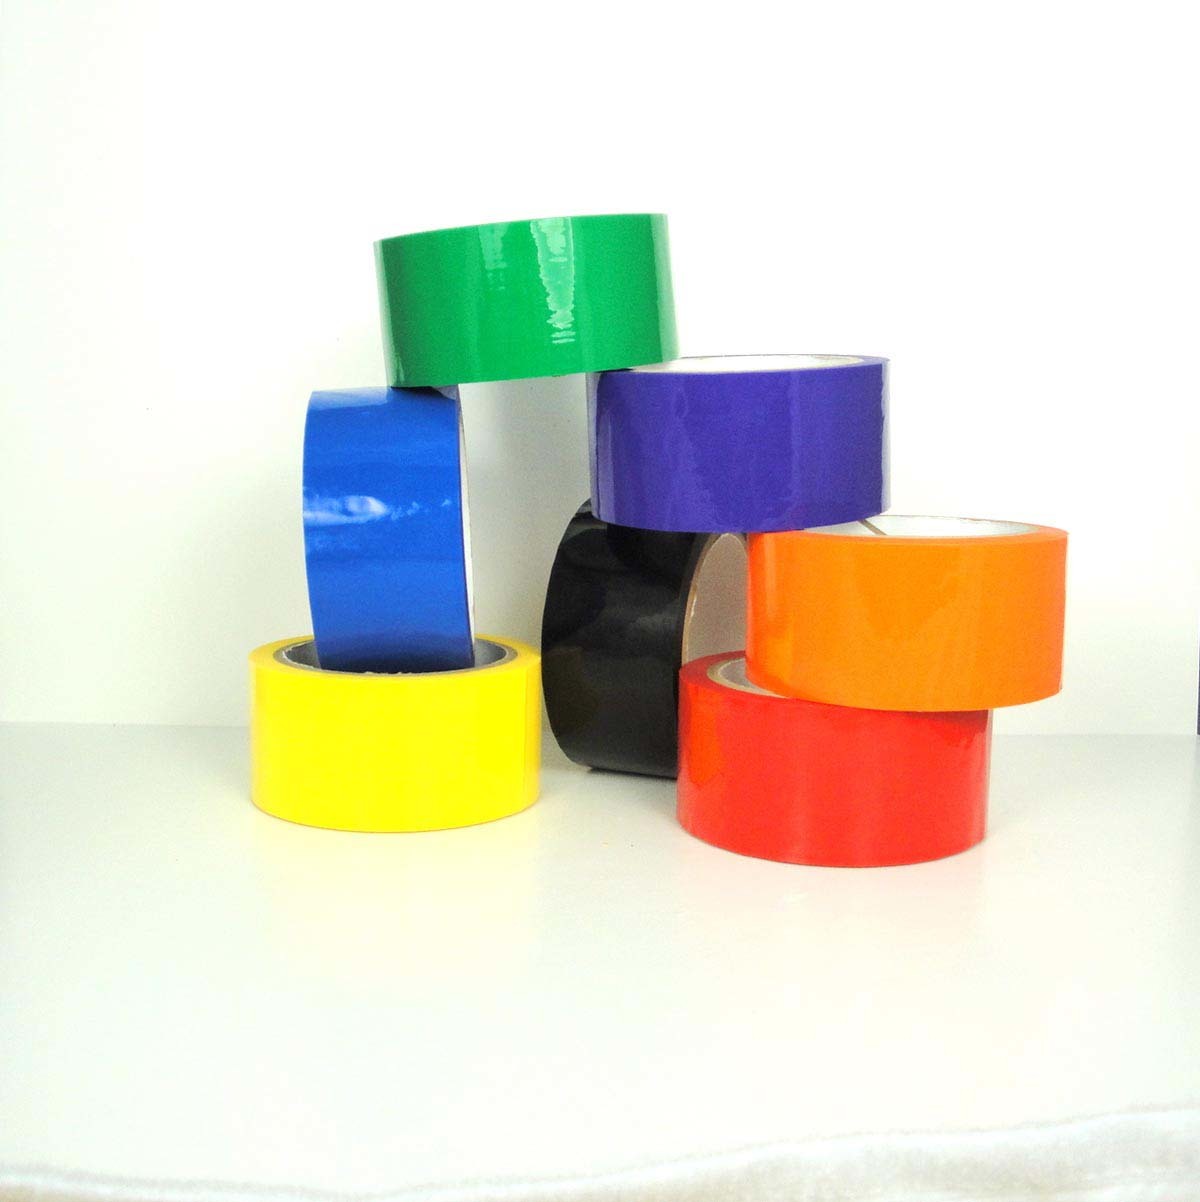 Black Packing Tape,Moving Tape,2 Inch x 110 Yards, 2.0 Mil Thick,Heavy Duty  Tape (1 ROLL)